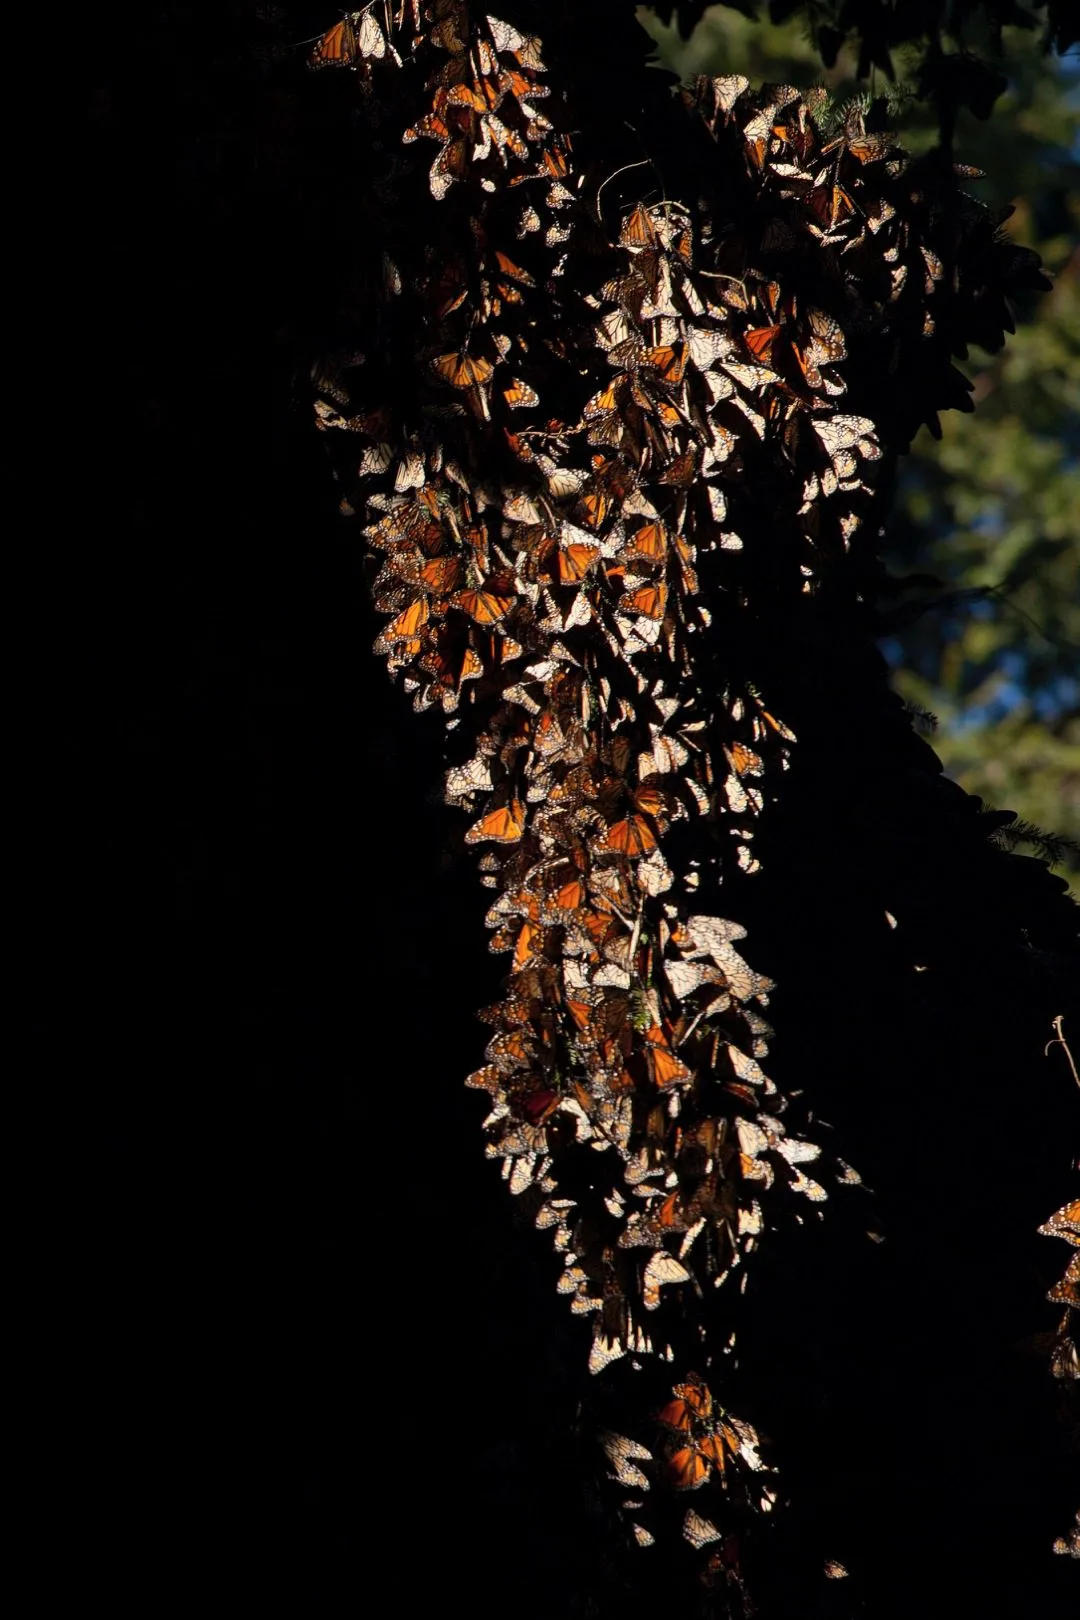 Free travel grant for teachers to learn about monarch butterflies in Mexico! Tips on applying for the educational scholarship and amazing photos of the monarch migration. #Travel #TeacherTravel #Mexico #MonarchButterflies #Butterflies #MonarchMigration #TravelGrant #TravelScholarship #EducationalTravel